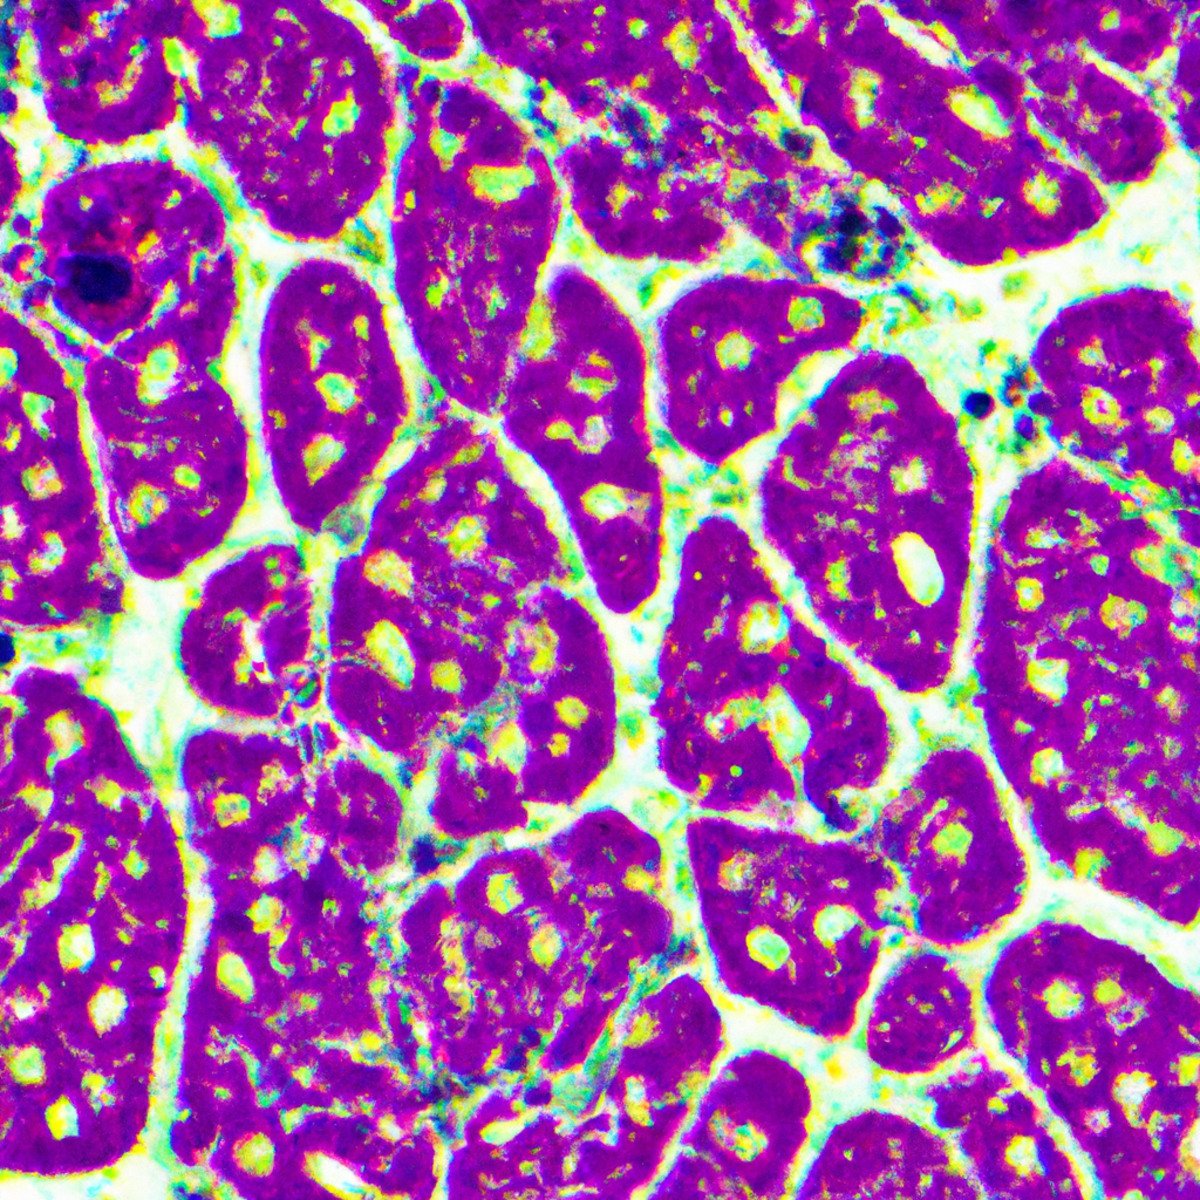 Close-up of microscope slide displaying intricate network of cells, showcasing abnormal proliferation of Langerhans cells in affected lung tissue.